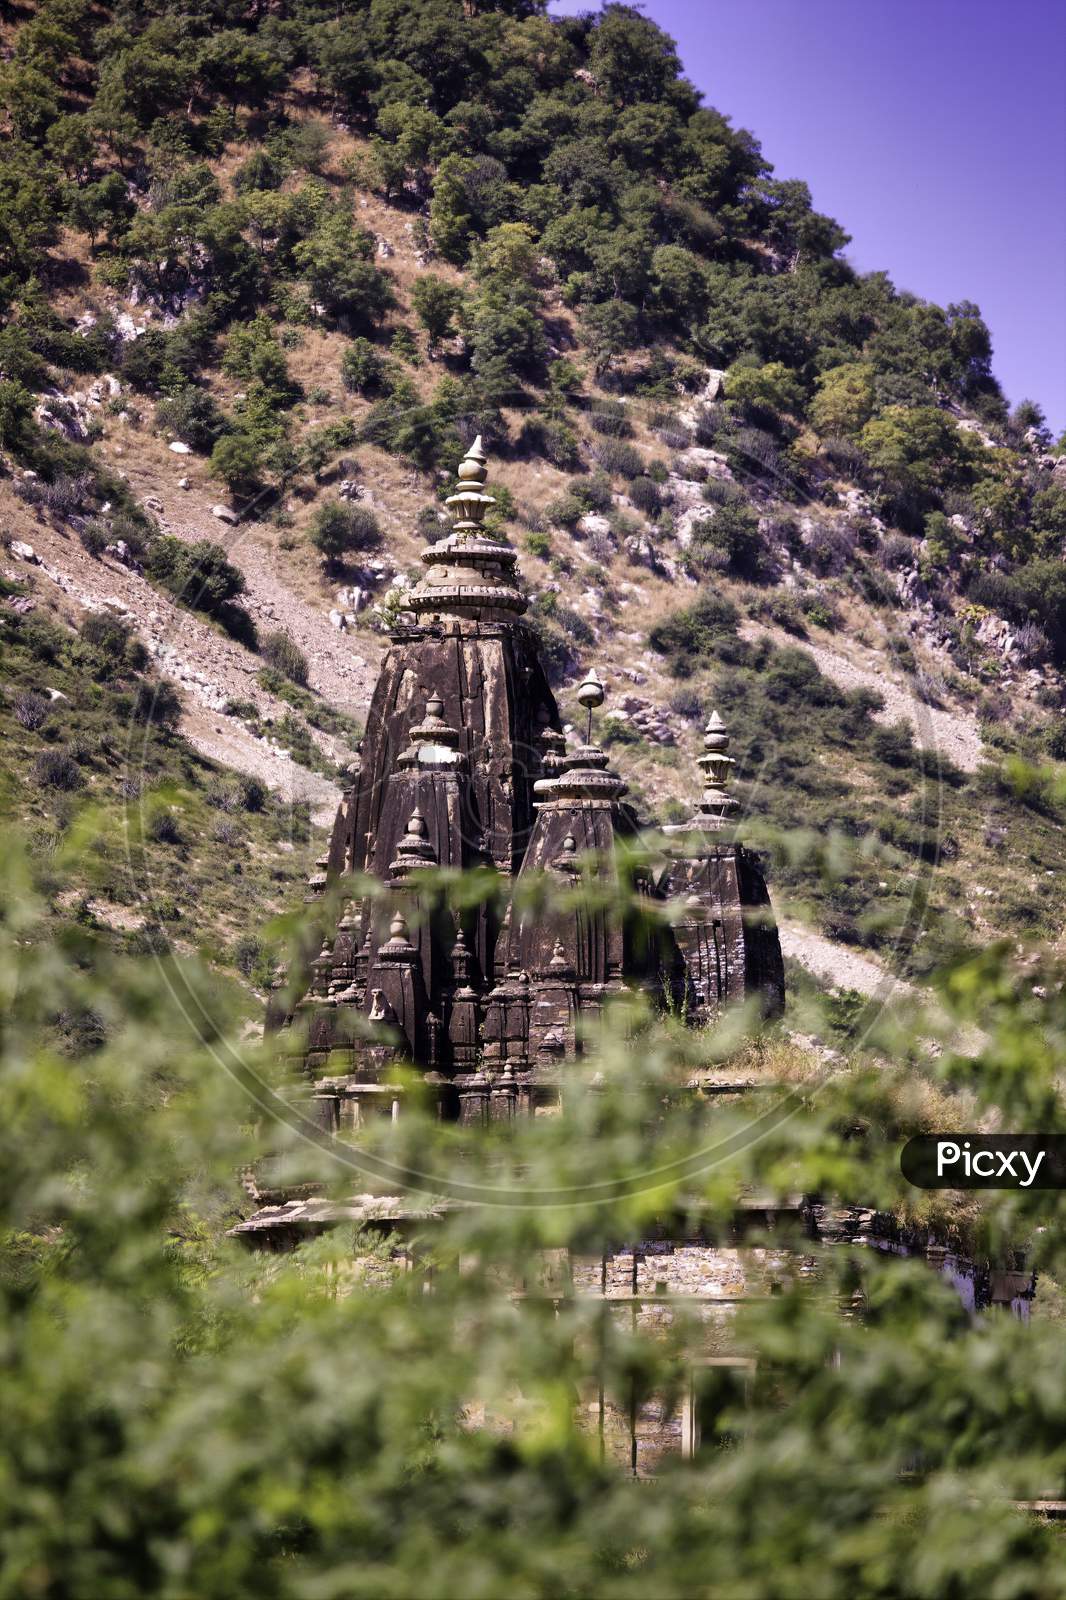 Rajasthan, India - October 06, 2012: A Landscape Containing Ancient Temple Ruined Surrounding Abandoned Cursed Fort In A Place Named Ajabgarh On A Way To Allegedly Haunted Place Bhangarh Fort